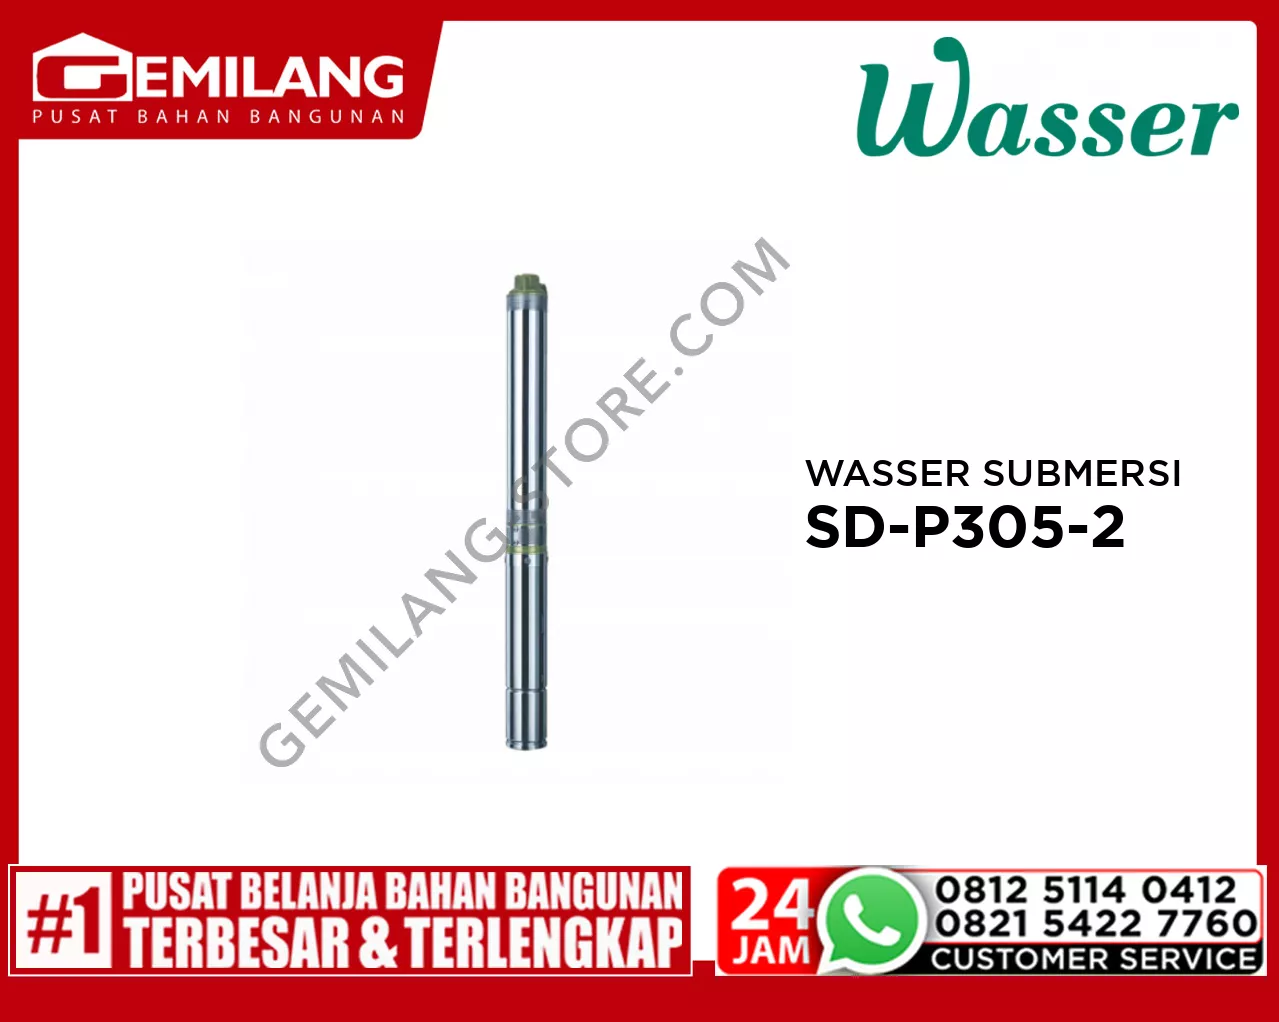 WASSER SUBMERSIBLE DEEP WELL PUMP PPO SINGLE PHASE SD-P305-2